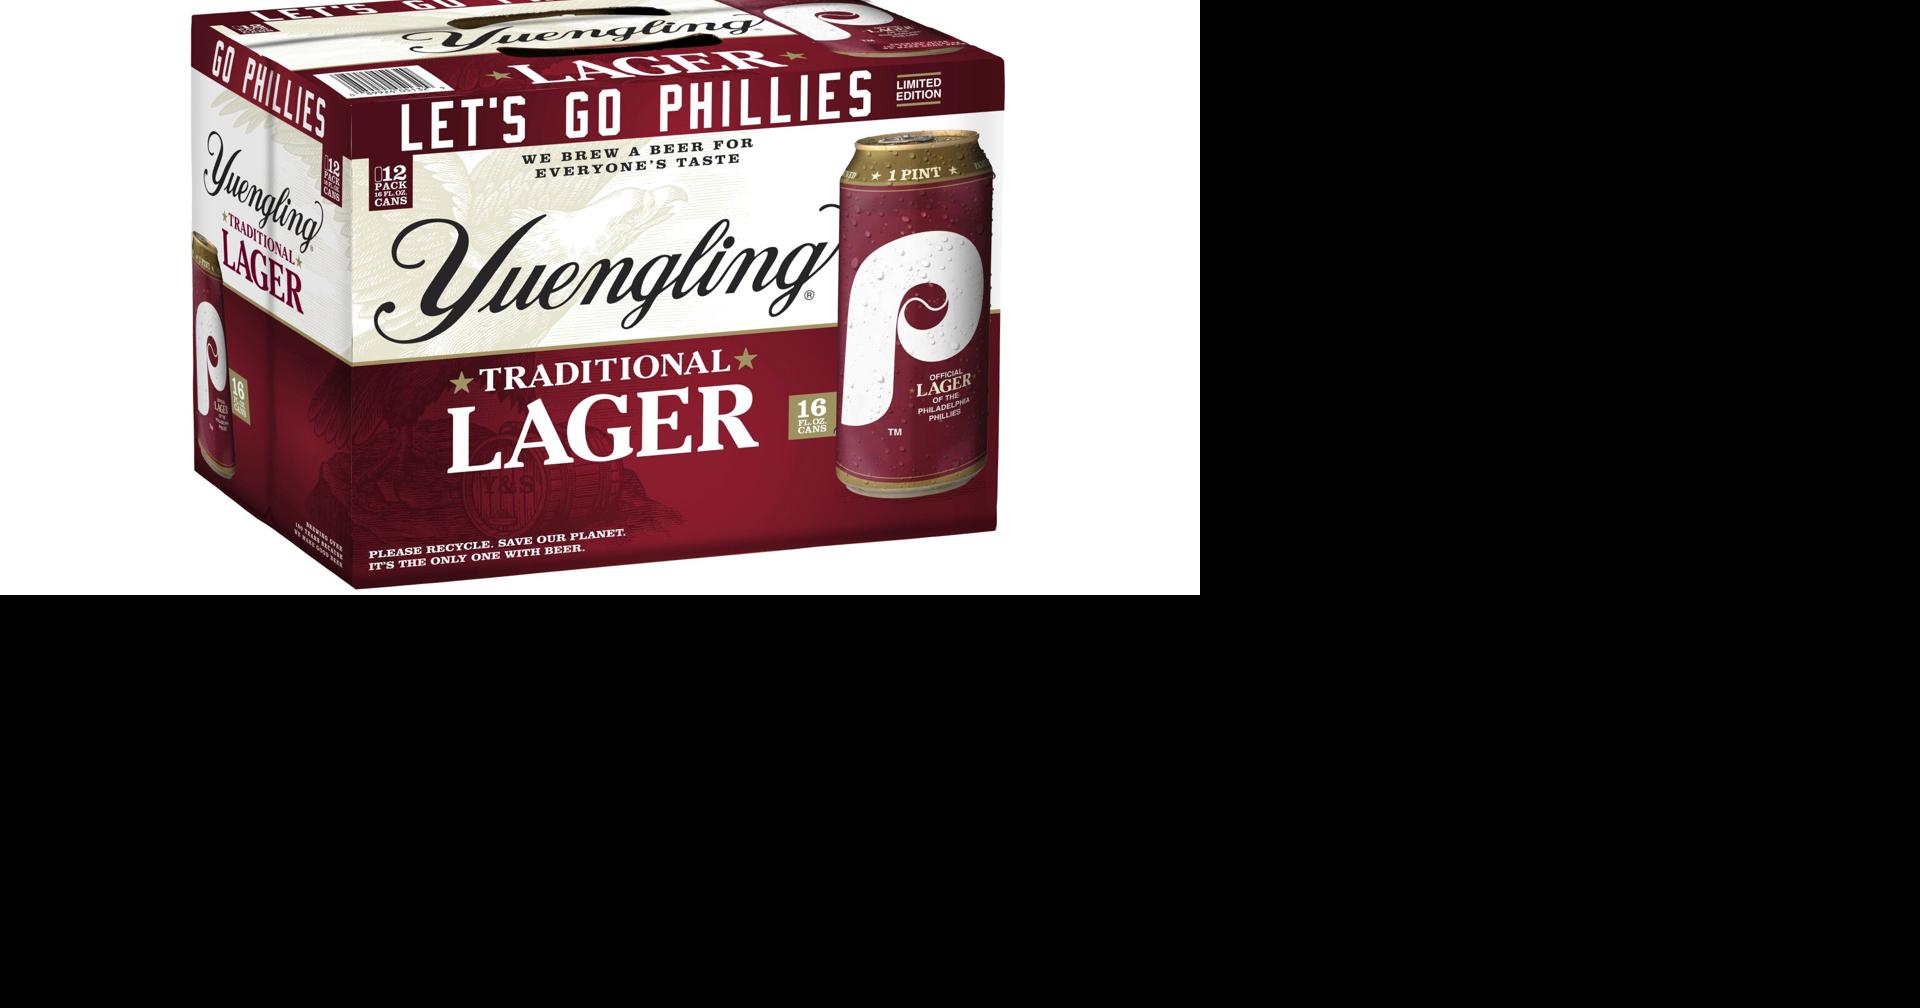 Phillies™ Lager Tee - Yuengling